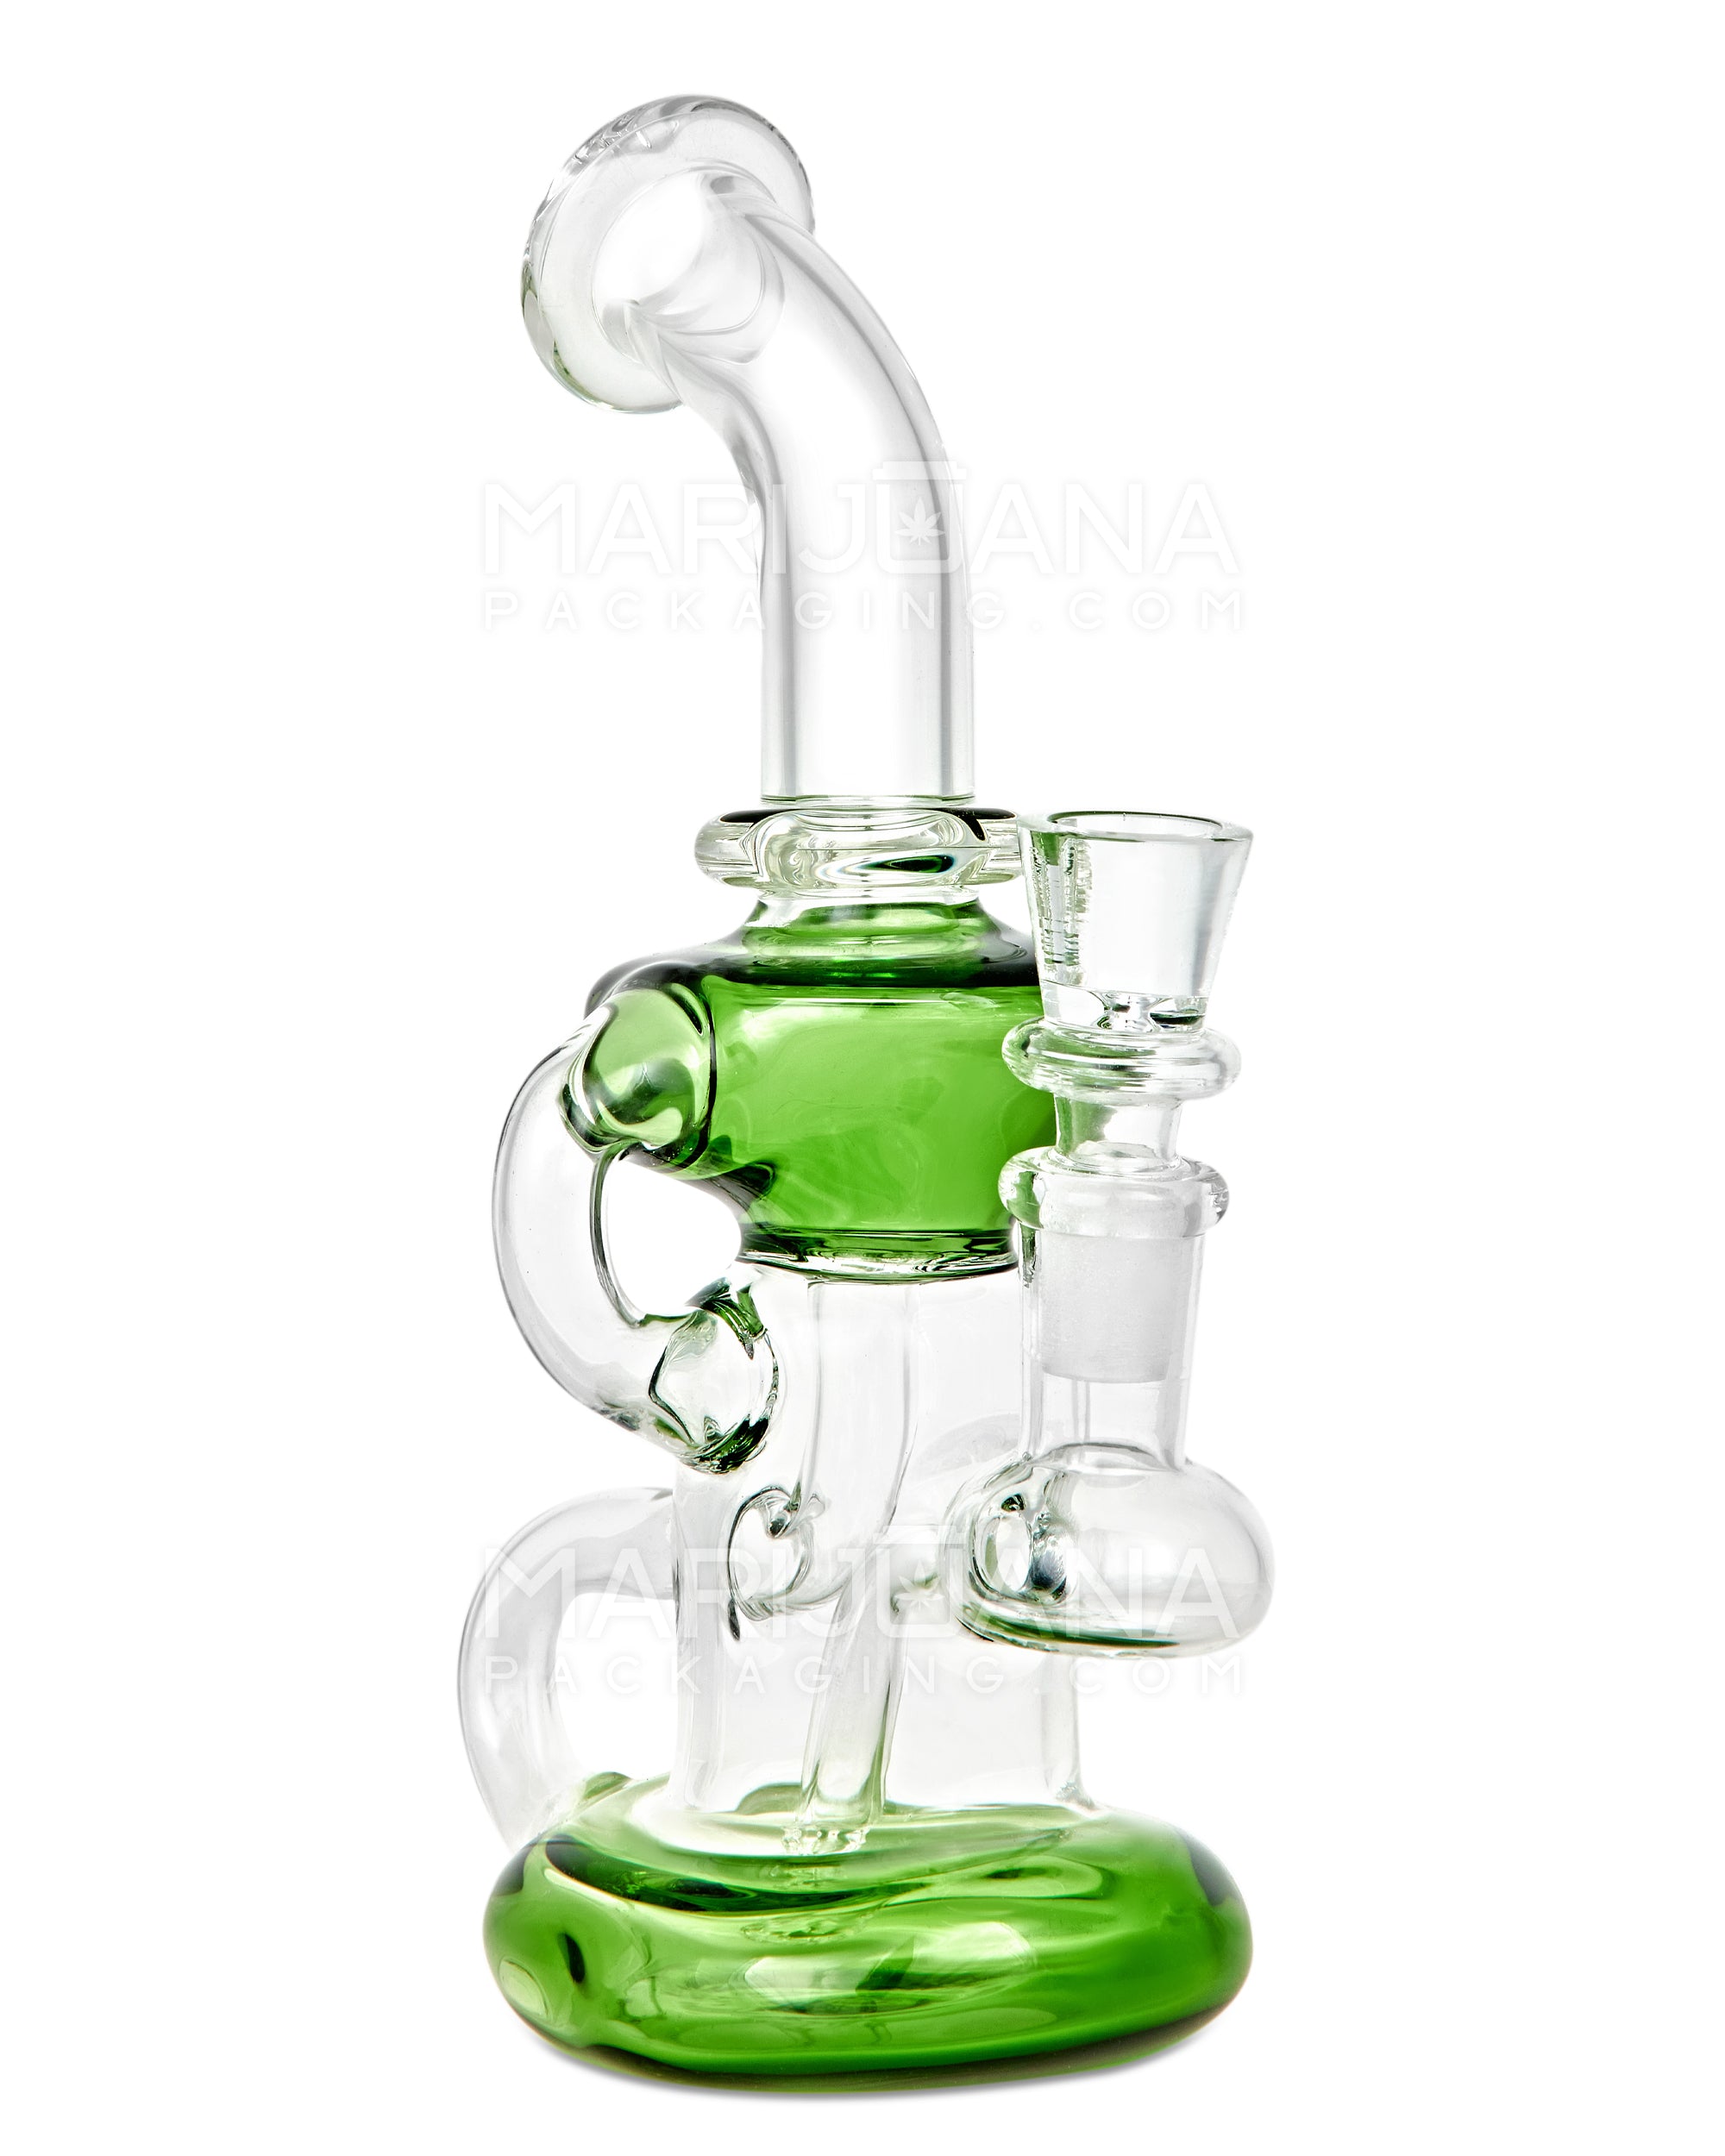 Bent Neck Diffused Perc Glass Water Pipe w/ Recycler | 8in Tall - 14mm Bowl - Green - 6